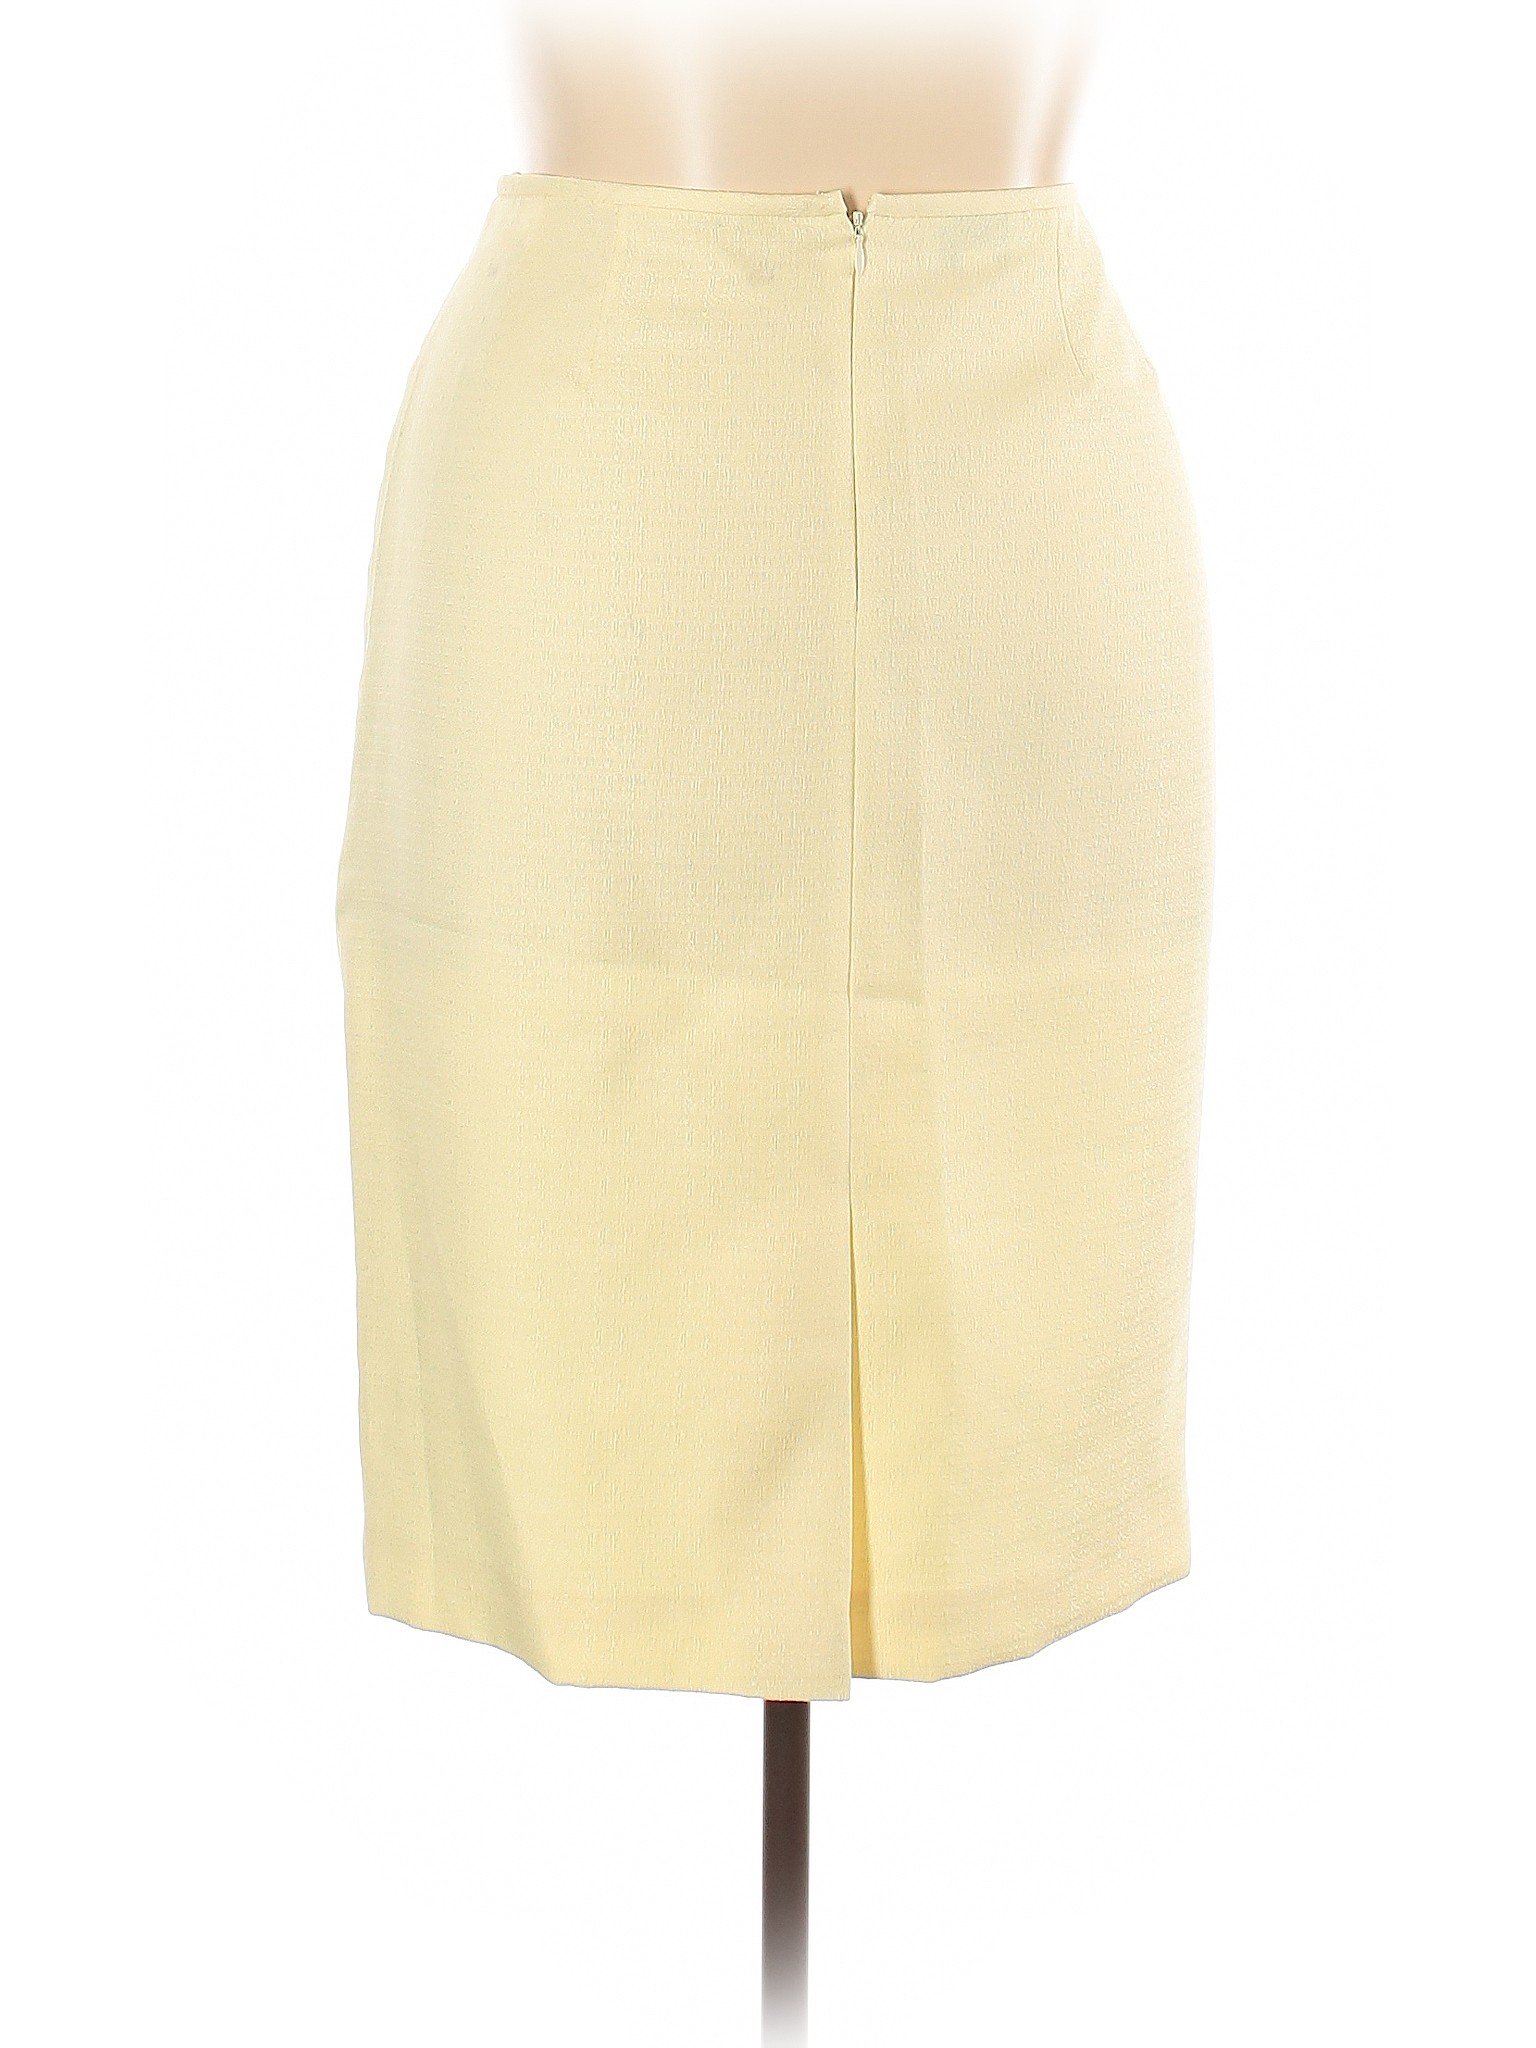 Le Suit Women Yellow Casual Skirt 14 | eBay